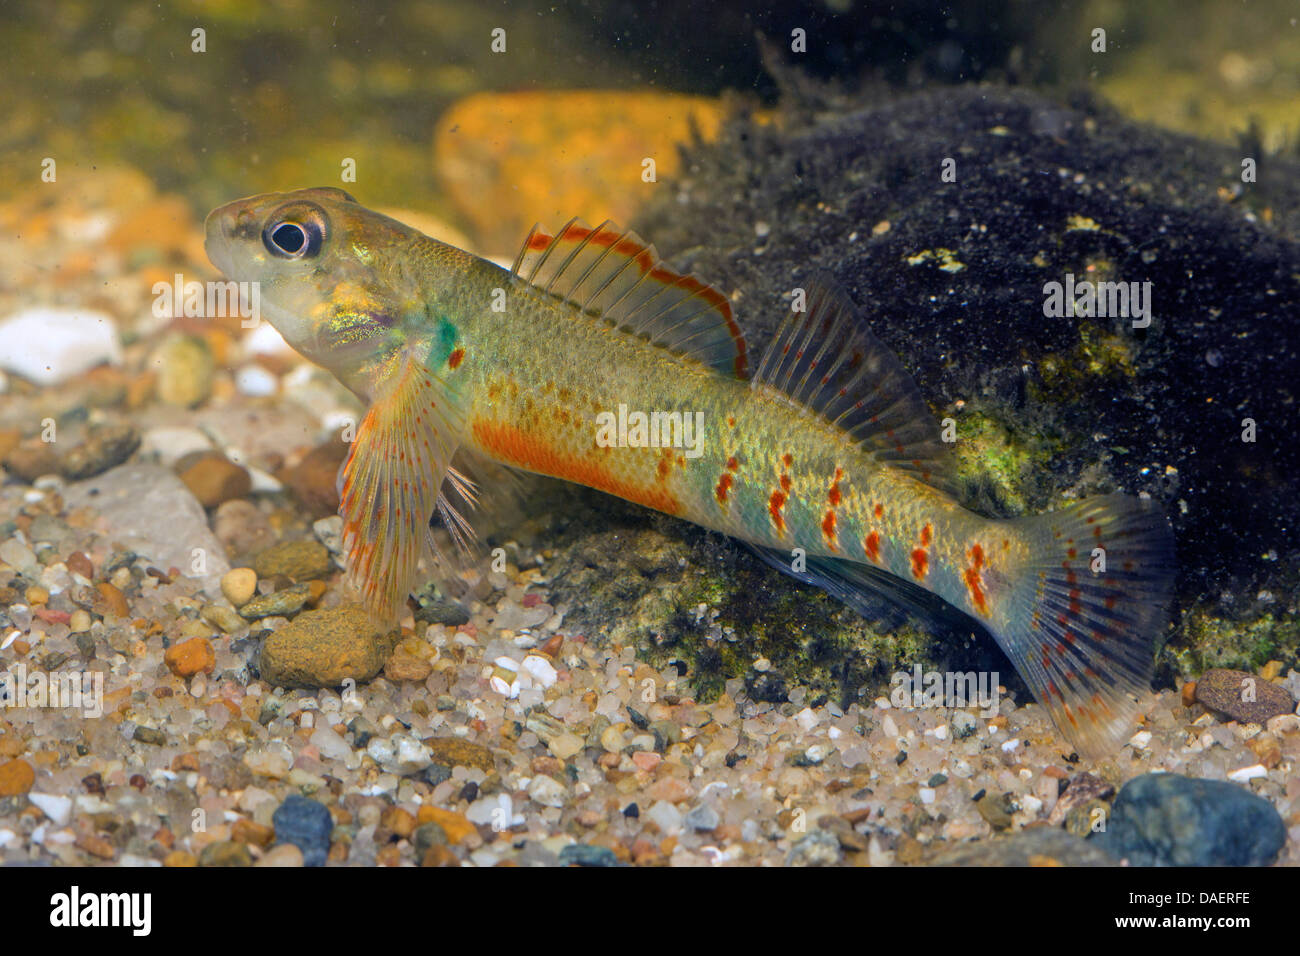 Variegate darter (Etheostoma variatum), male at the gravel ground of a water Stock Photo